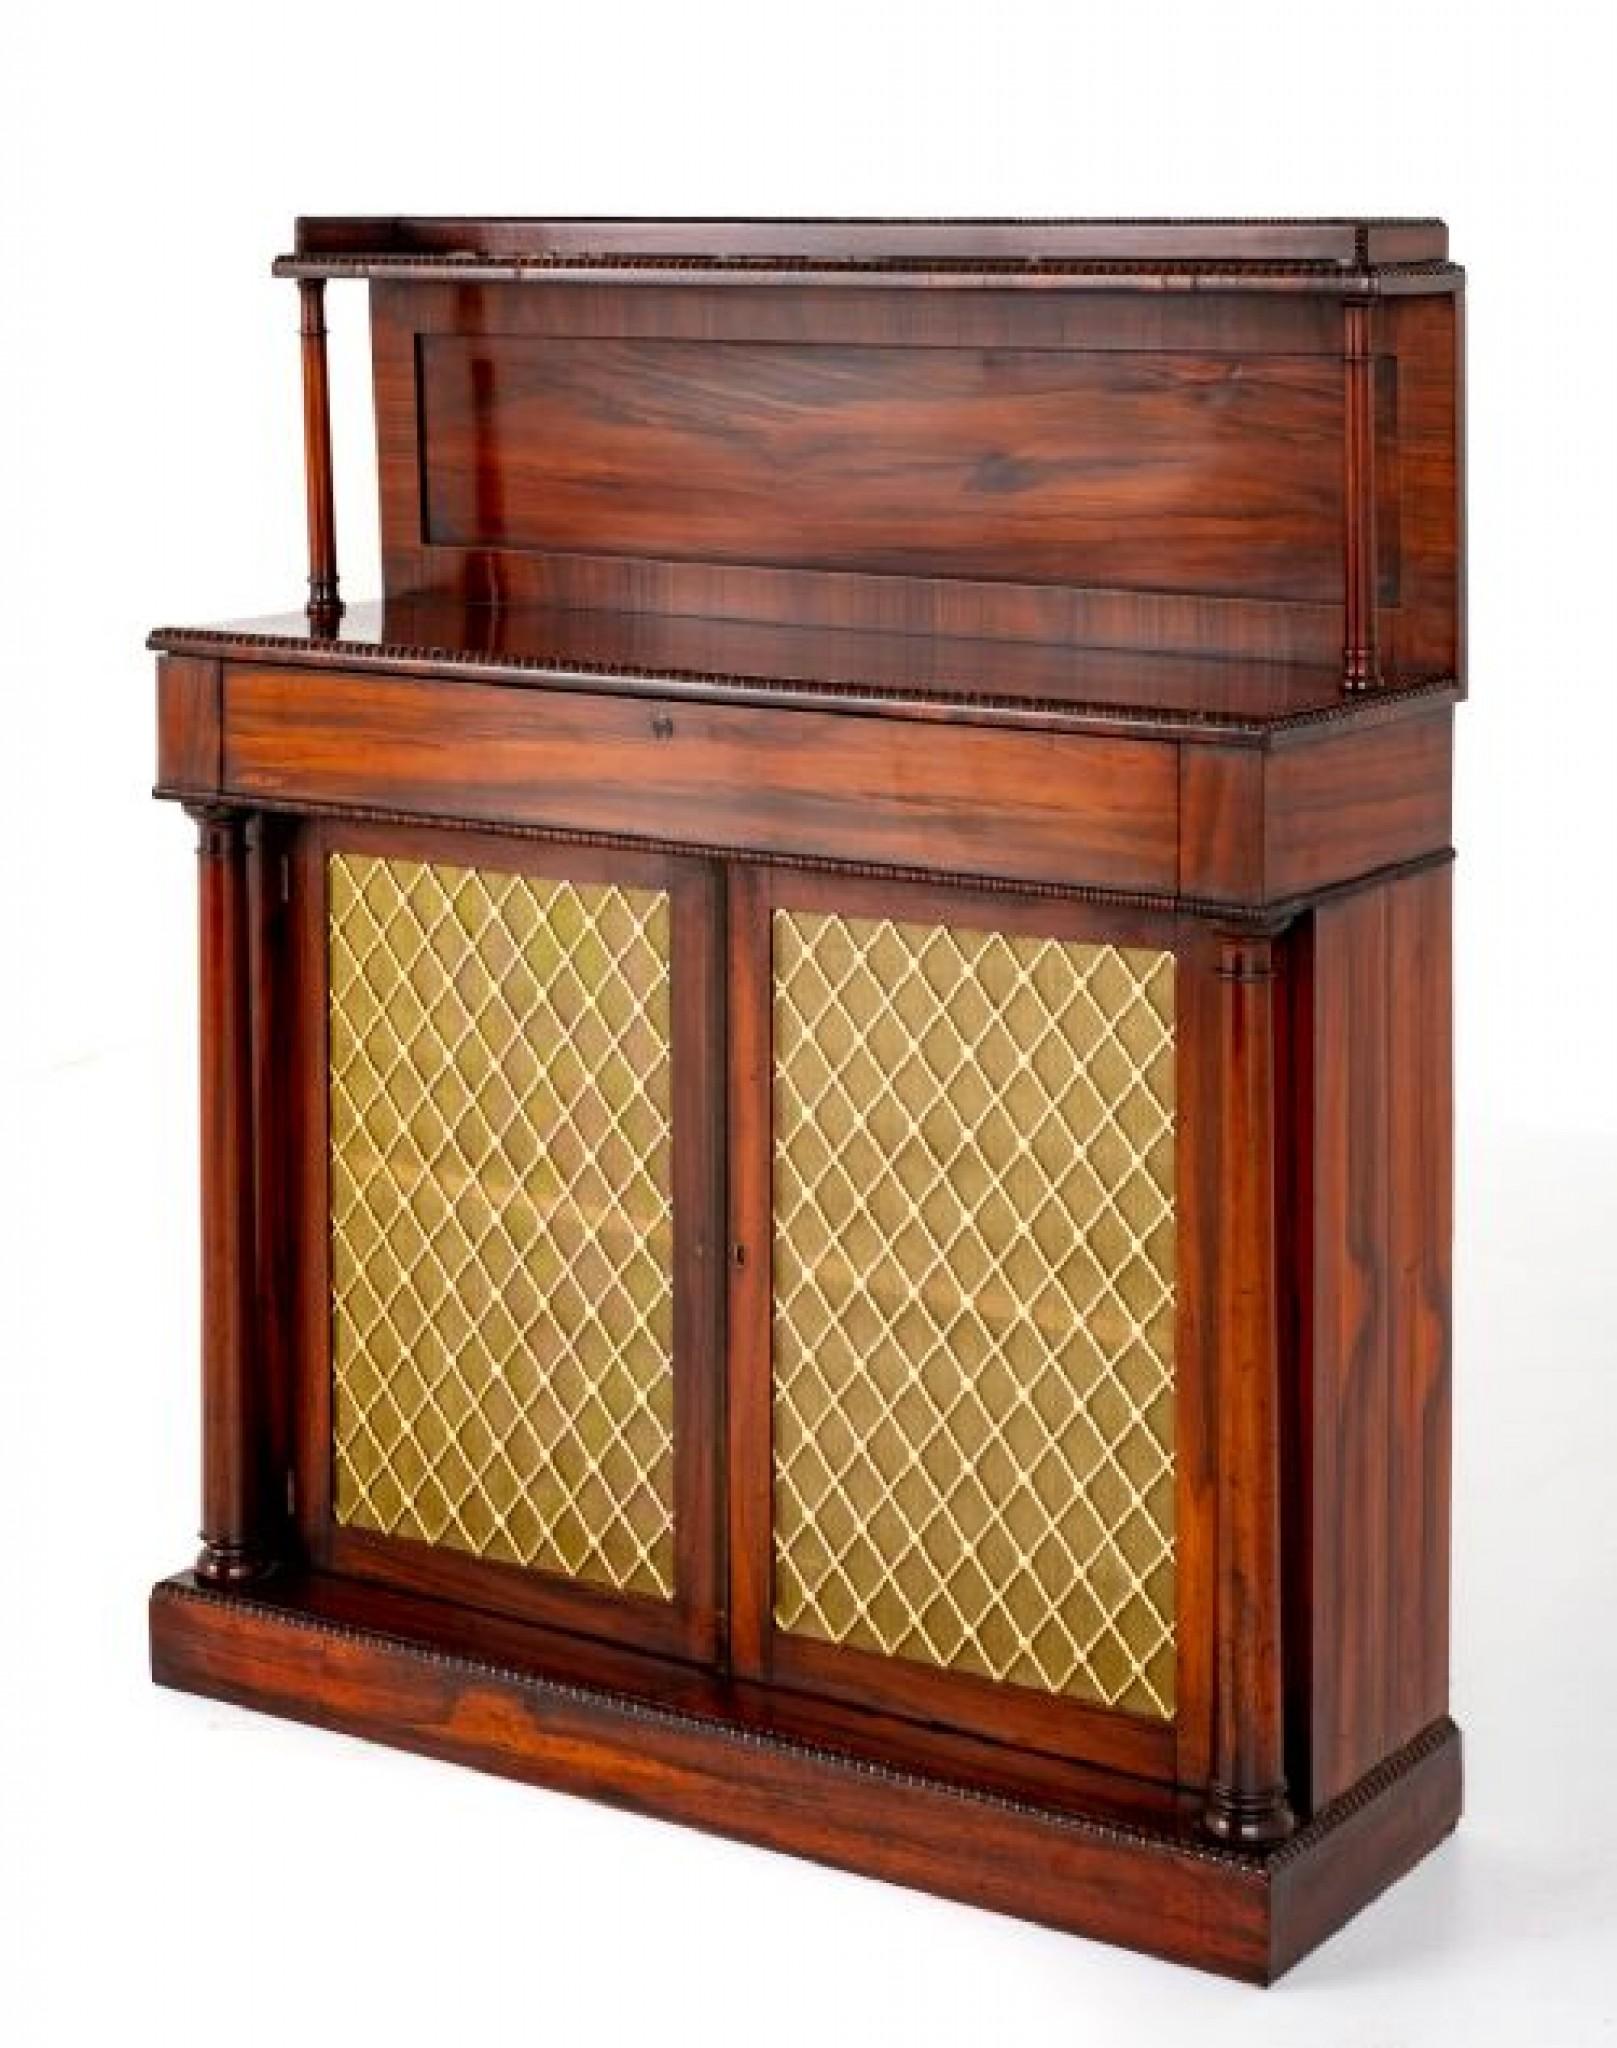 Regency Chiffonier Rosewood Antique Sideboard In Good Condition For Sale In Potters Bar, GB